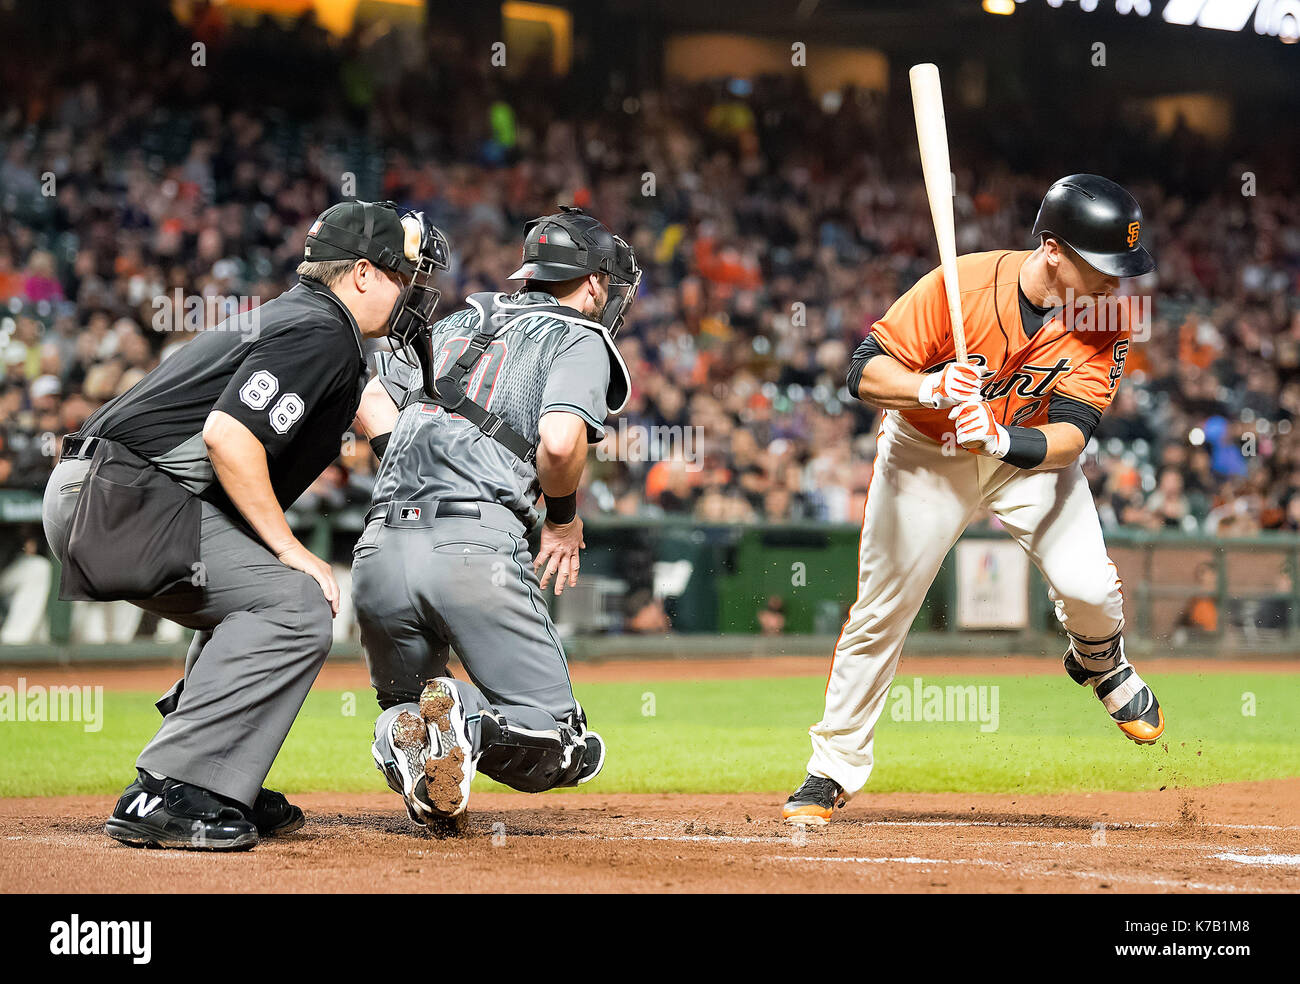 San Francisco, California, USA. 15th Sep, 2017. San Francisco Giants first baseman Buster Posey (28) steps away from a low pitch, during a MLB game between the Arizona Diamondbacks and the San Francisco Giants at AT&T Park in San Francisco, California. Valerie Shoaps/CSM/Alamy Live News Stock Photo